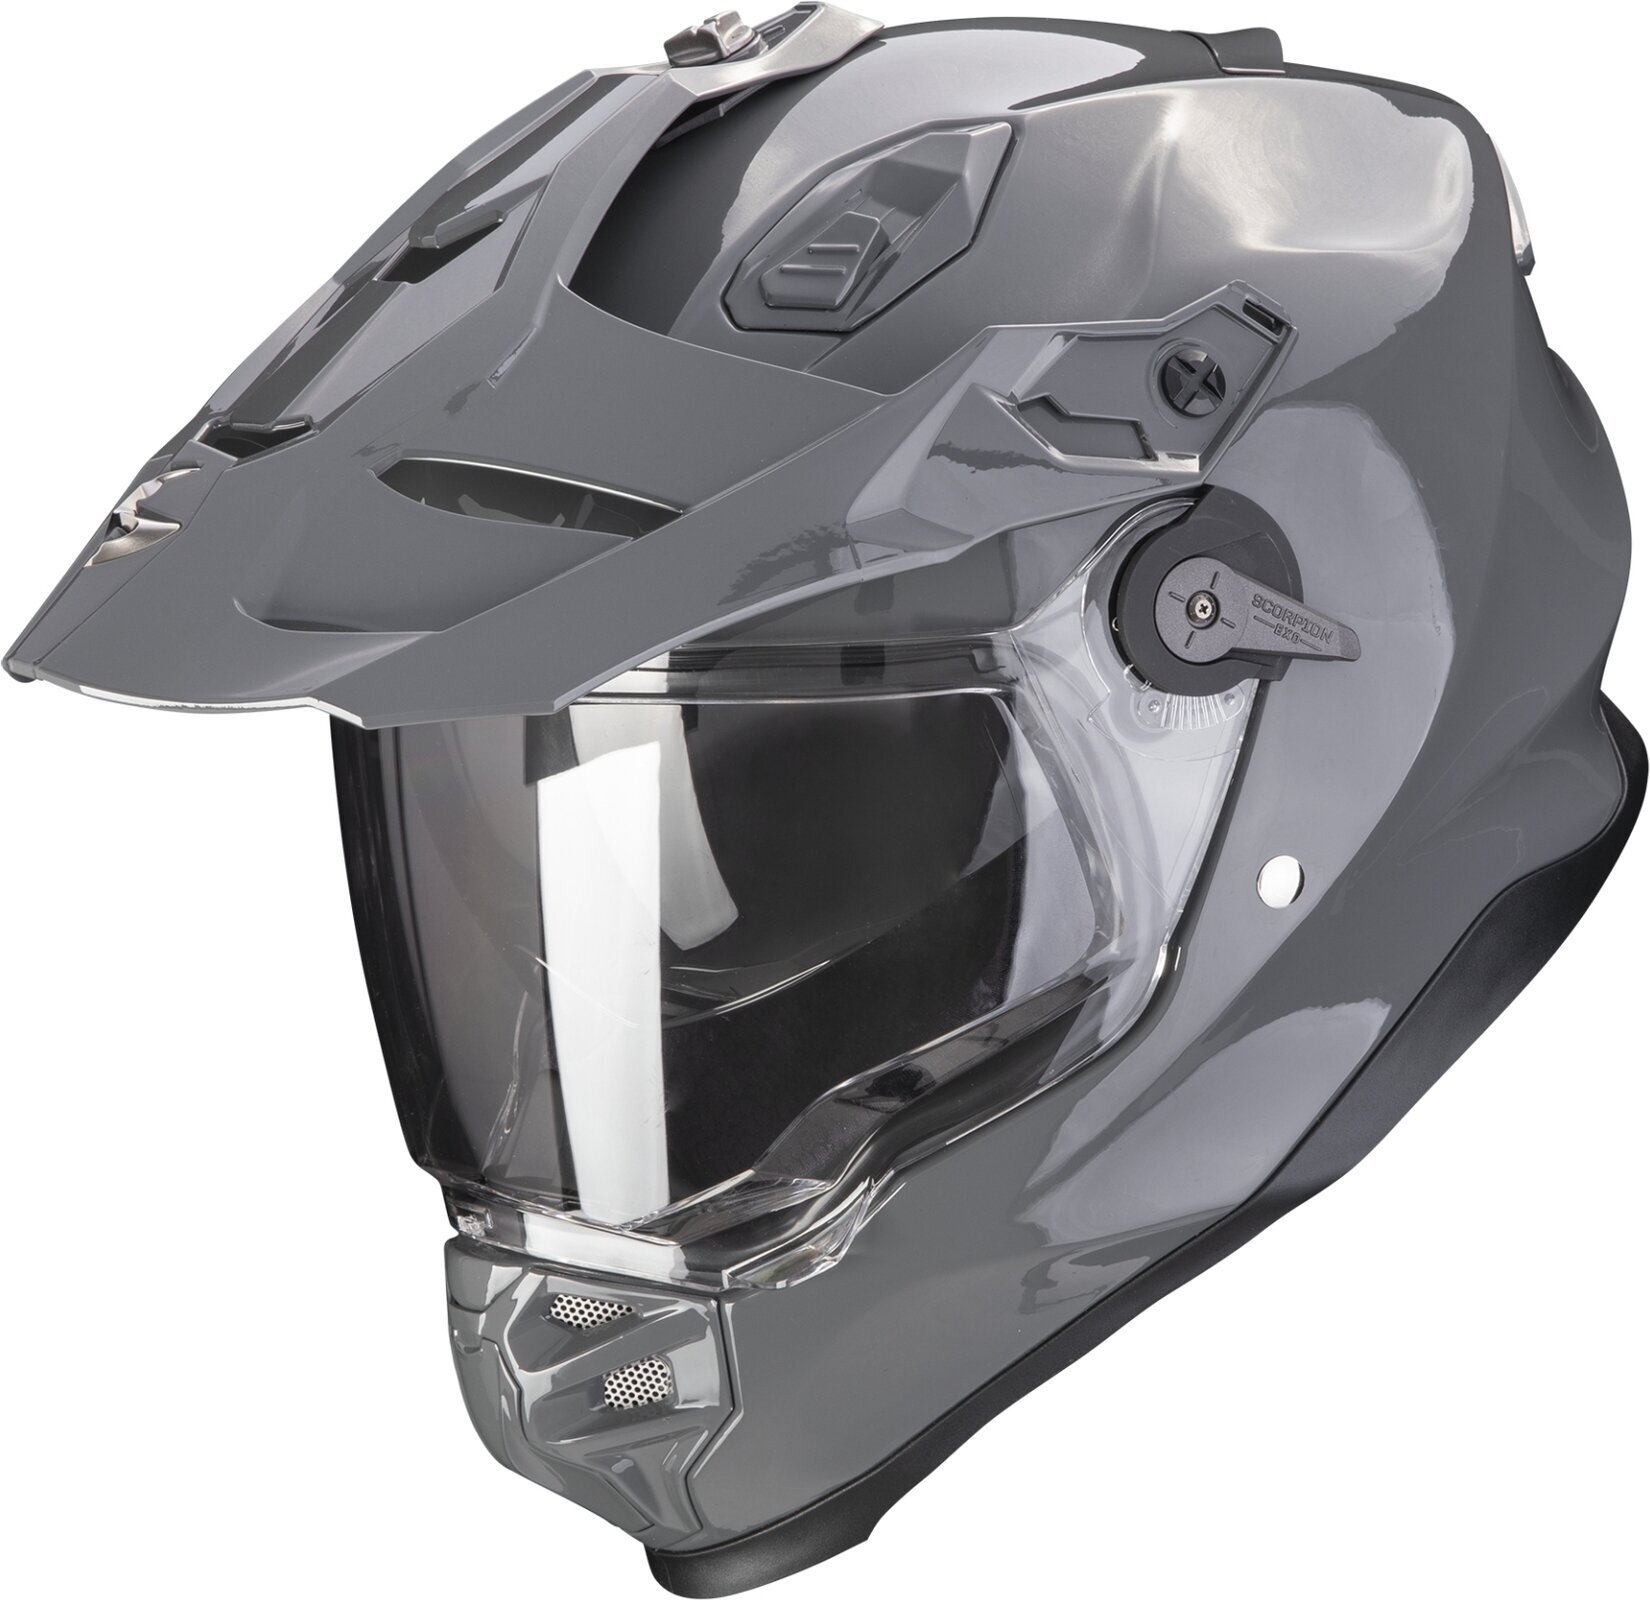 Casca Scorpion ADF-9000 AIR SOLID Cement Grey XS Casca